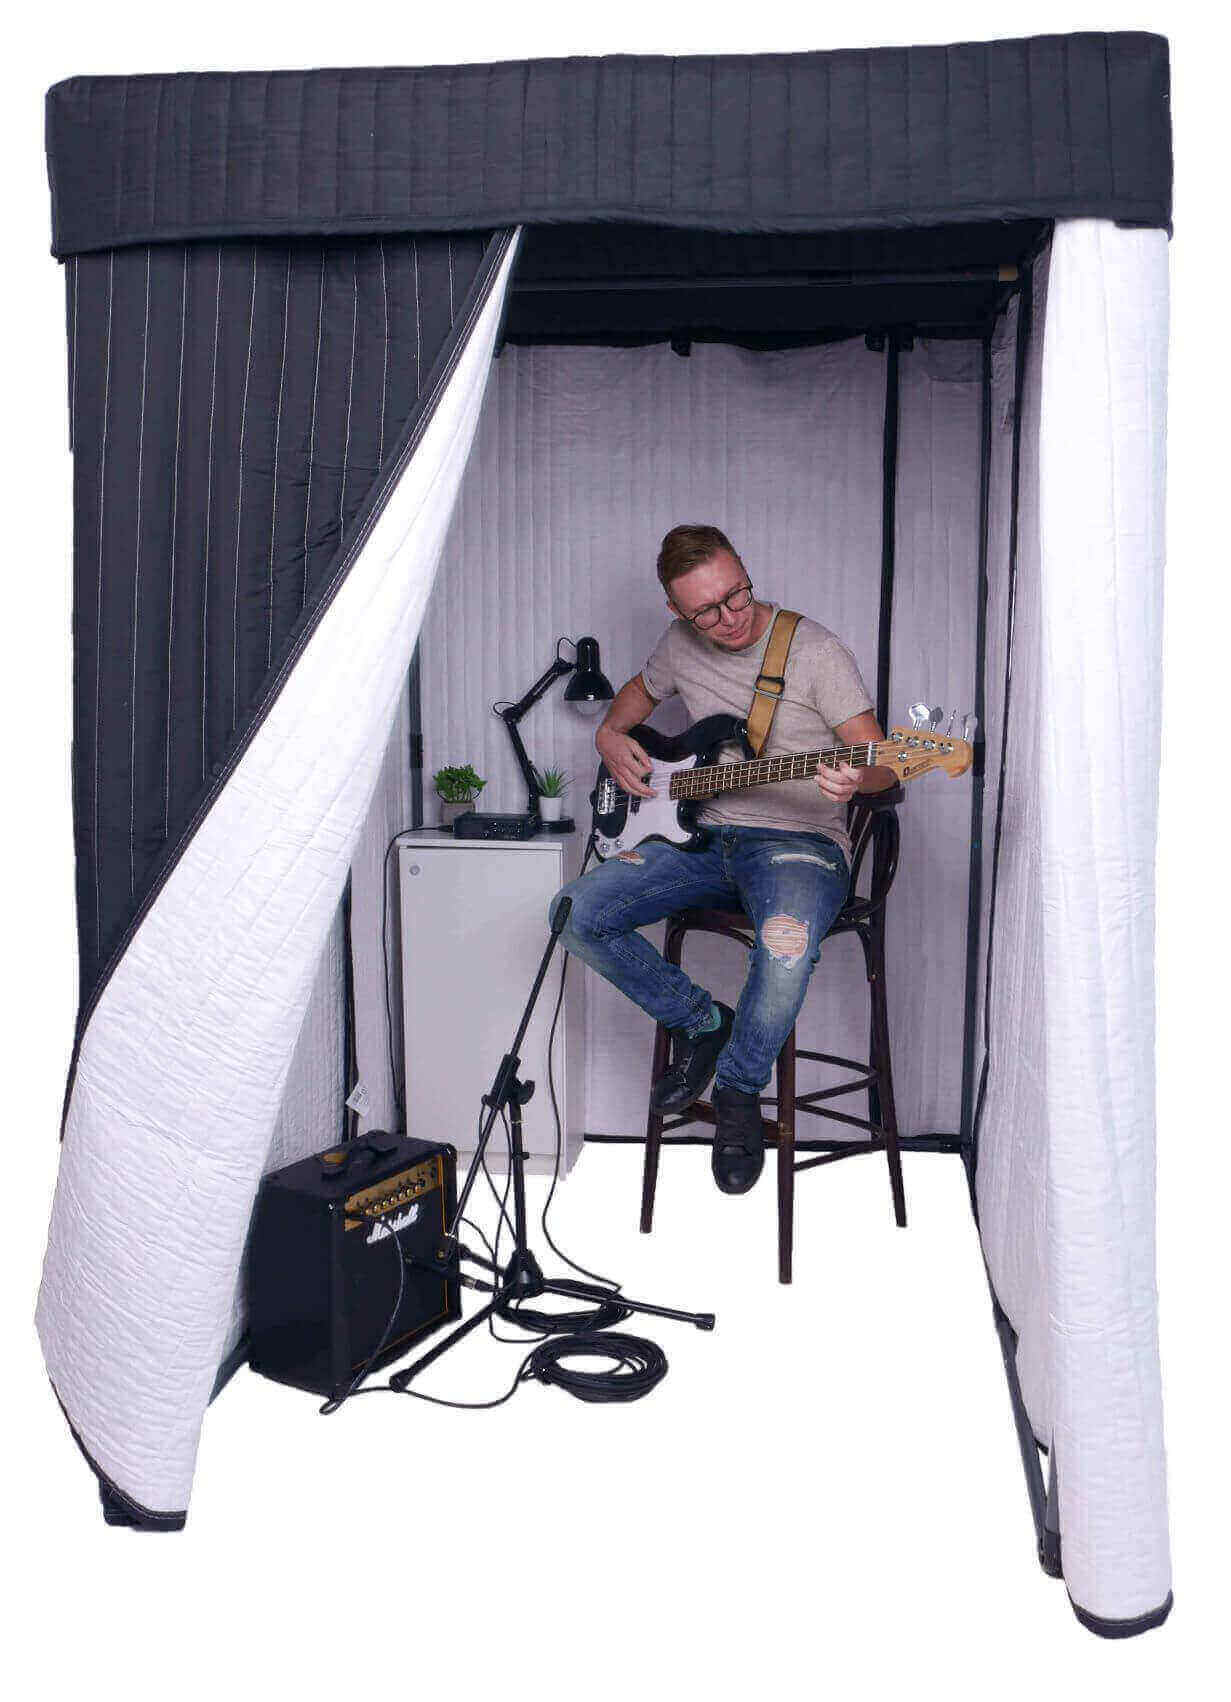 booth-person-electric-guitar-chair-555